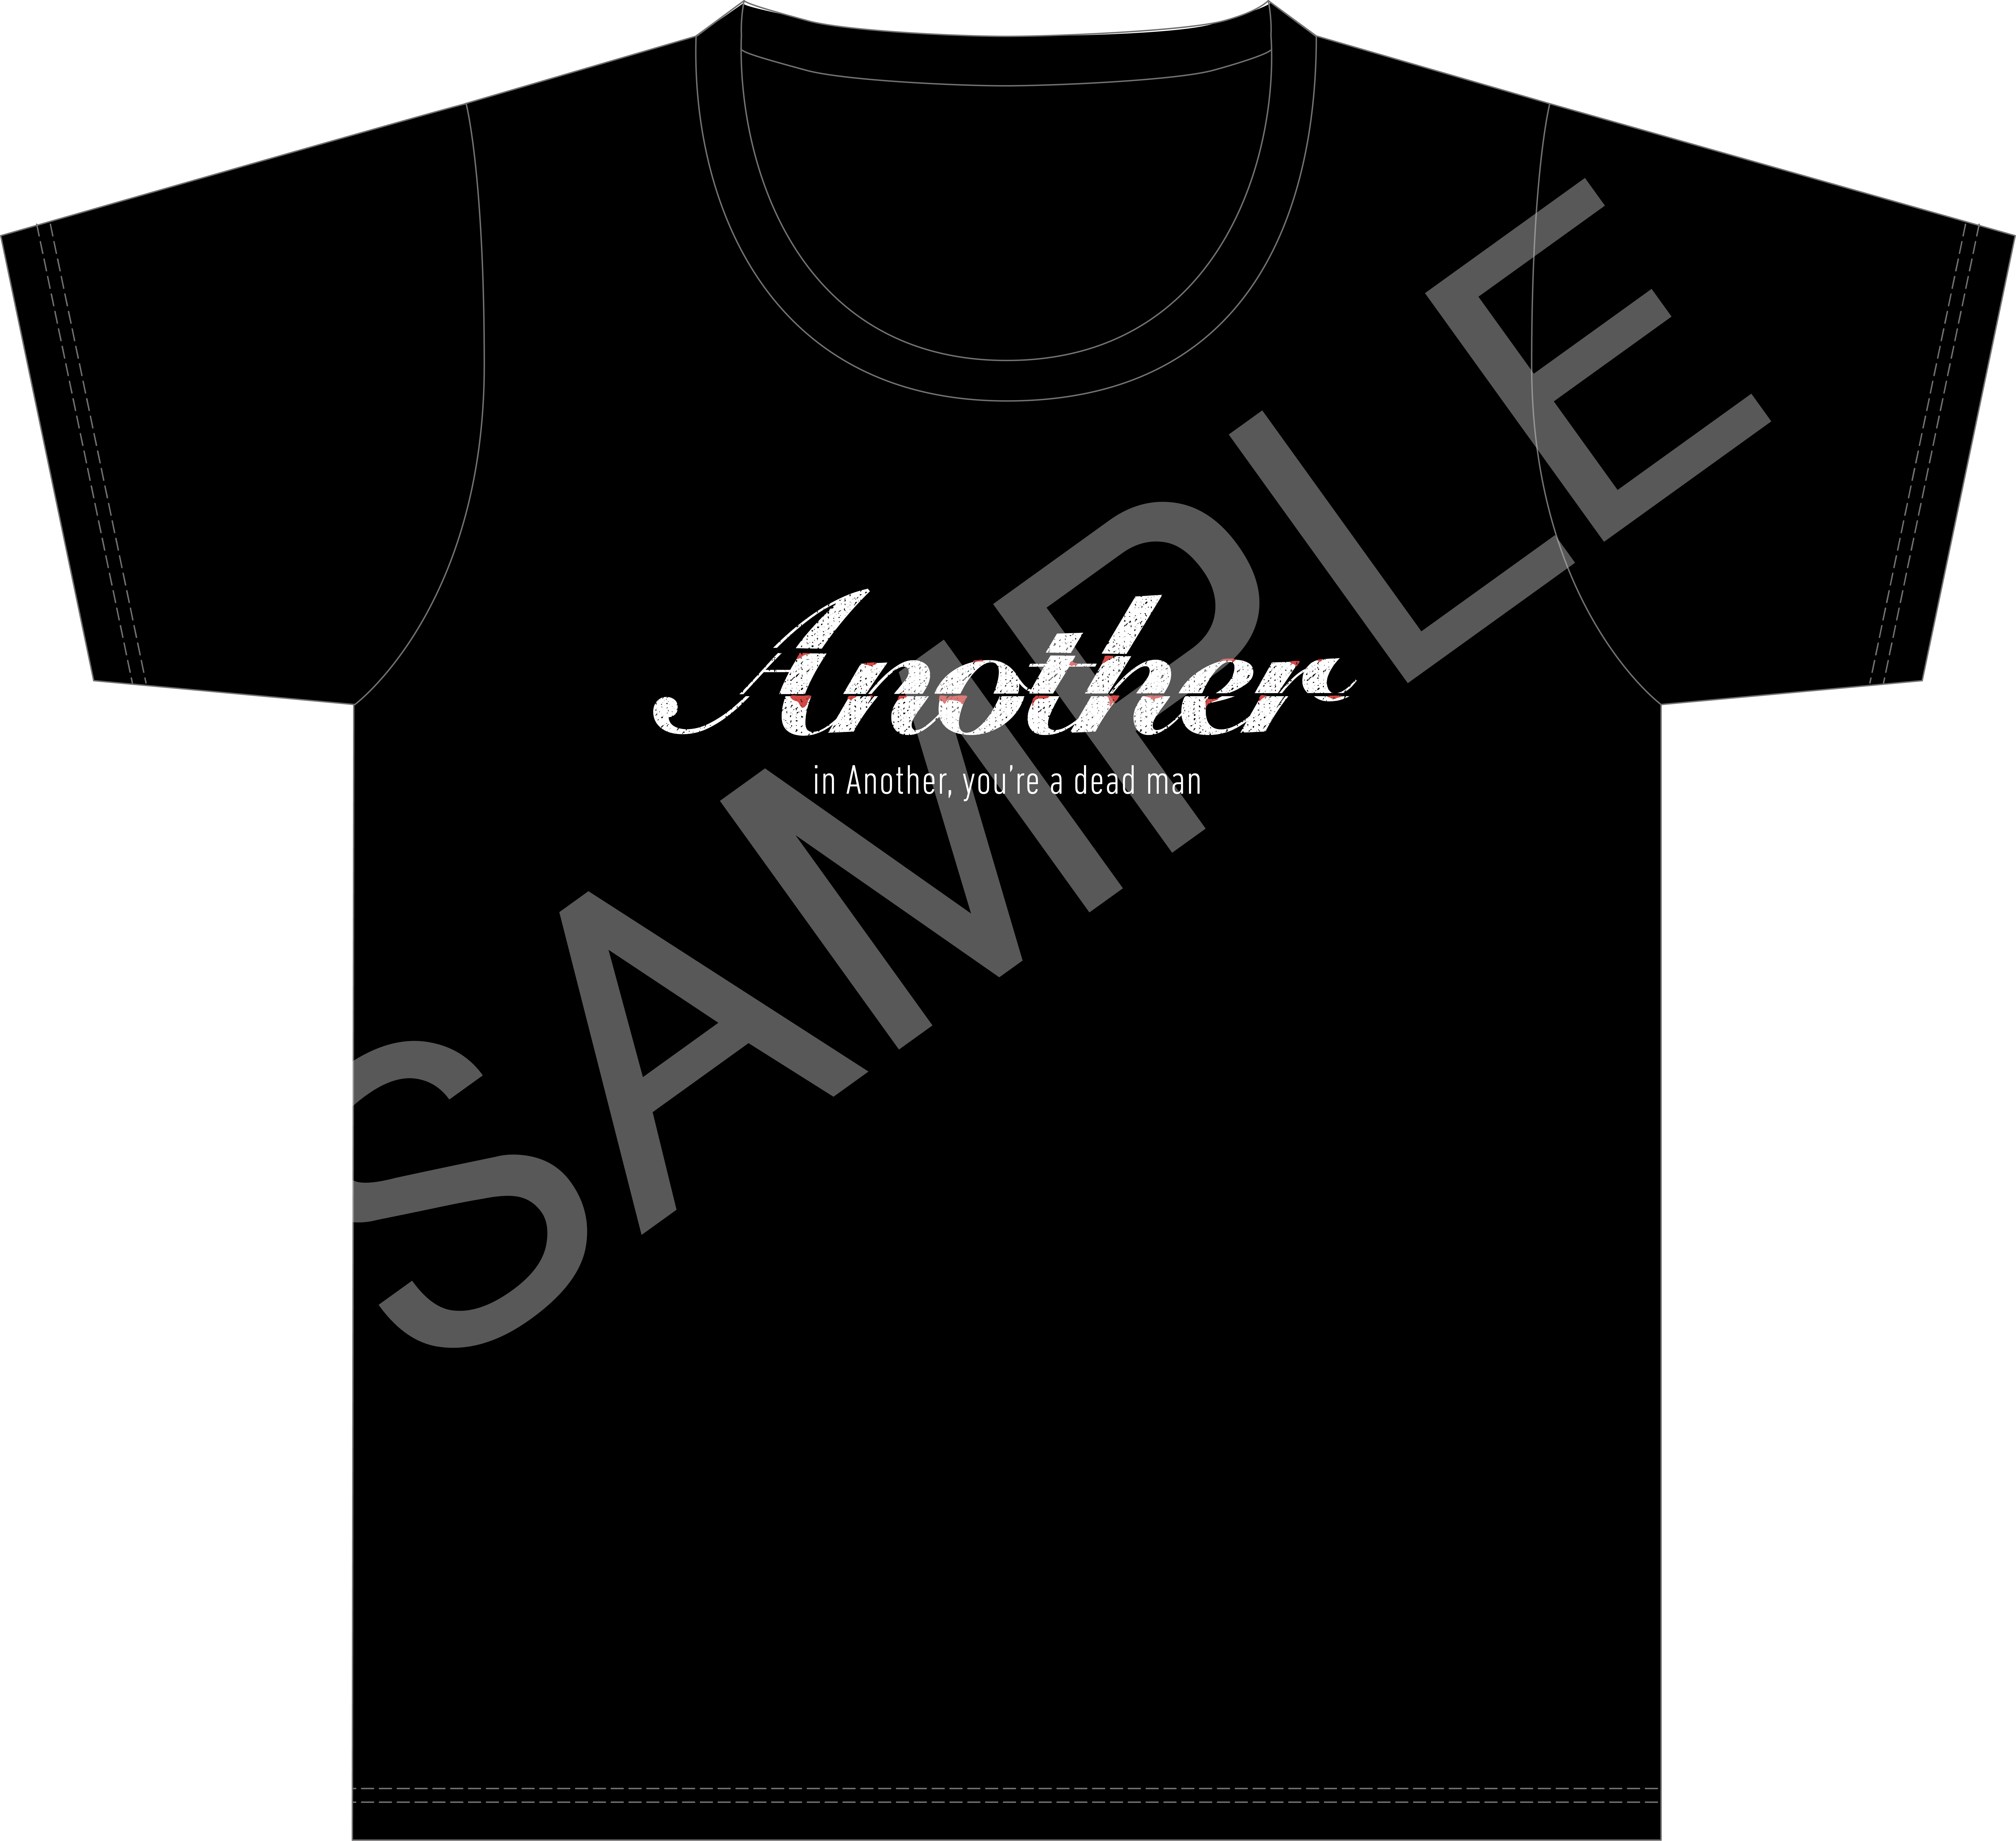 「Another」Tシャツ〜in Another...〜